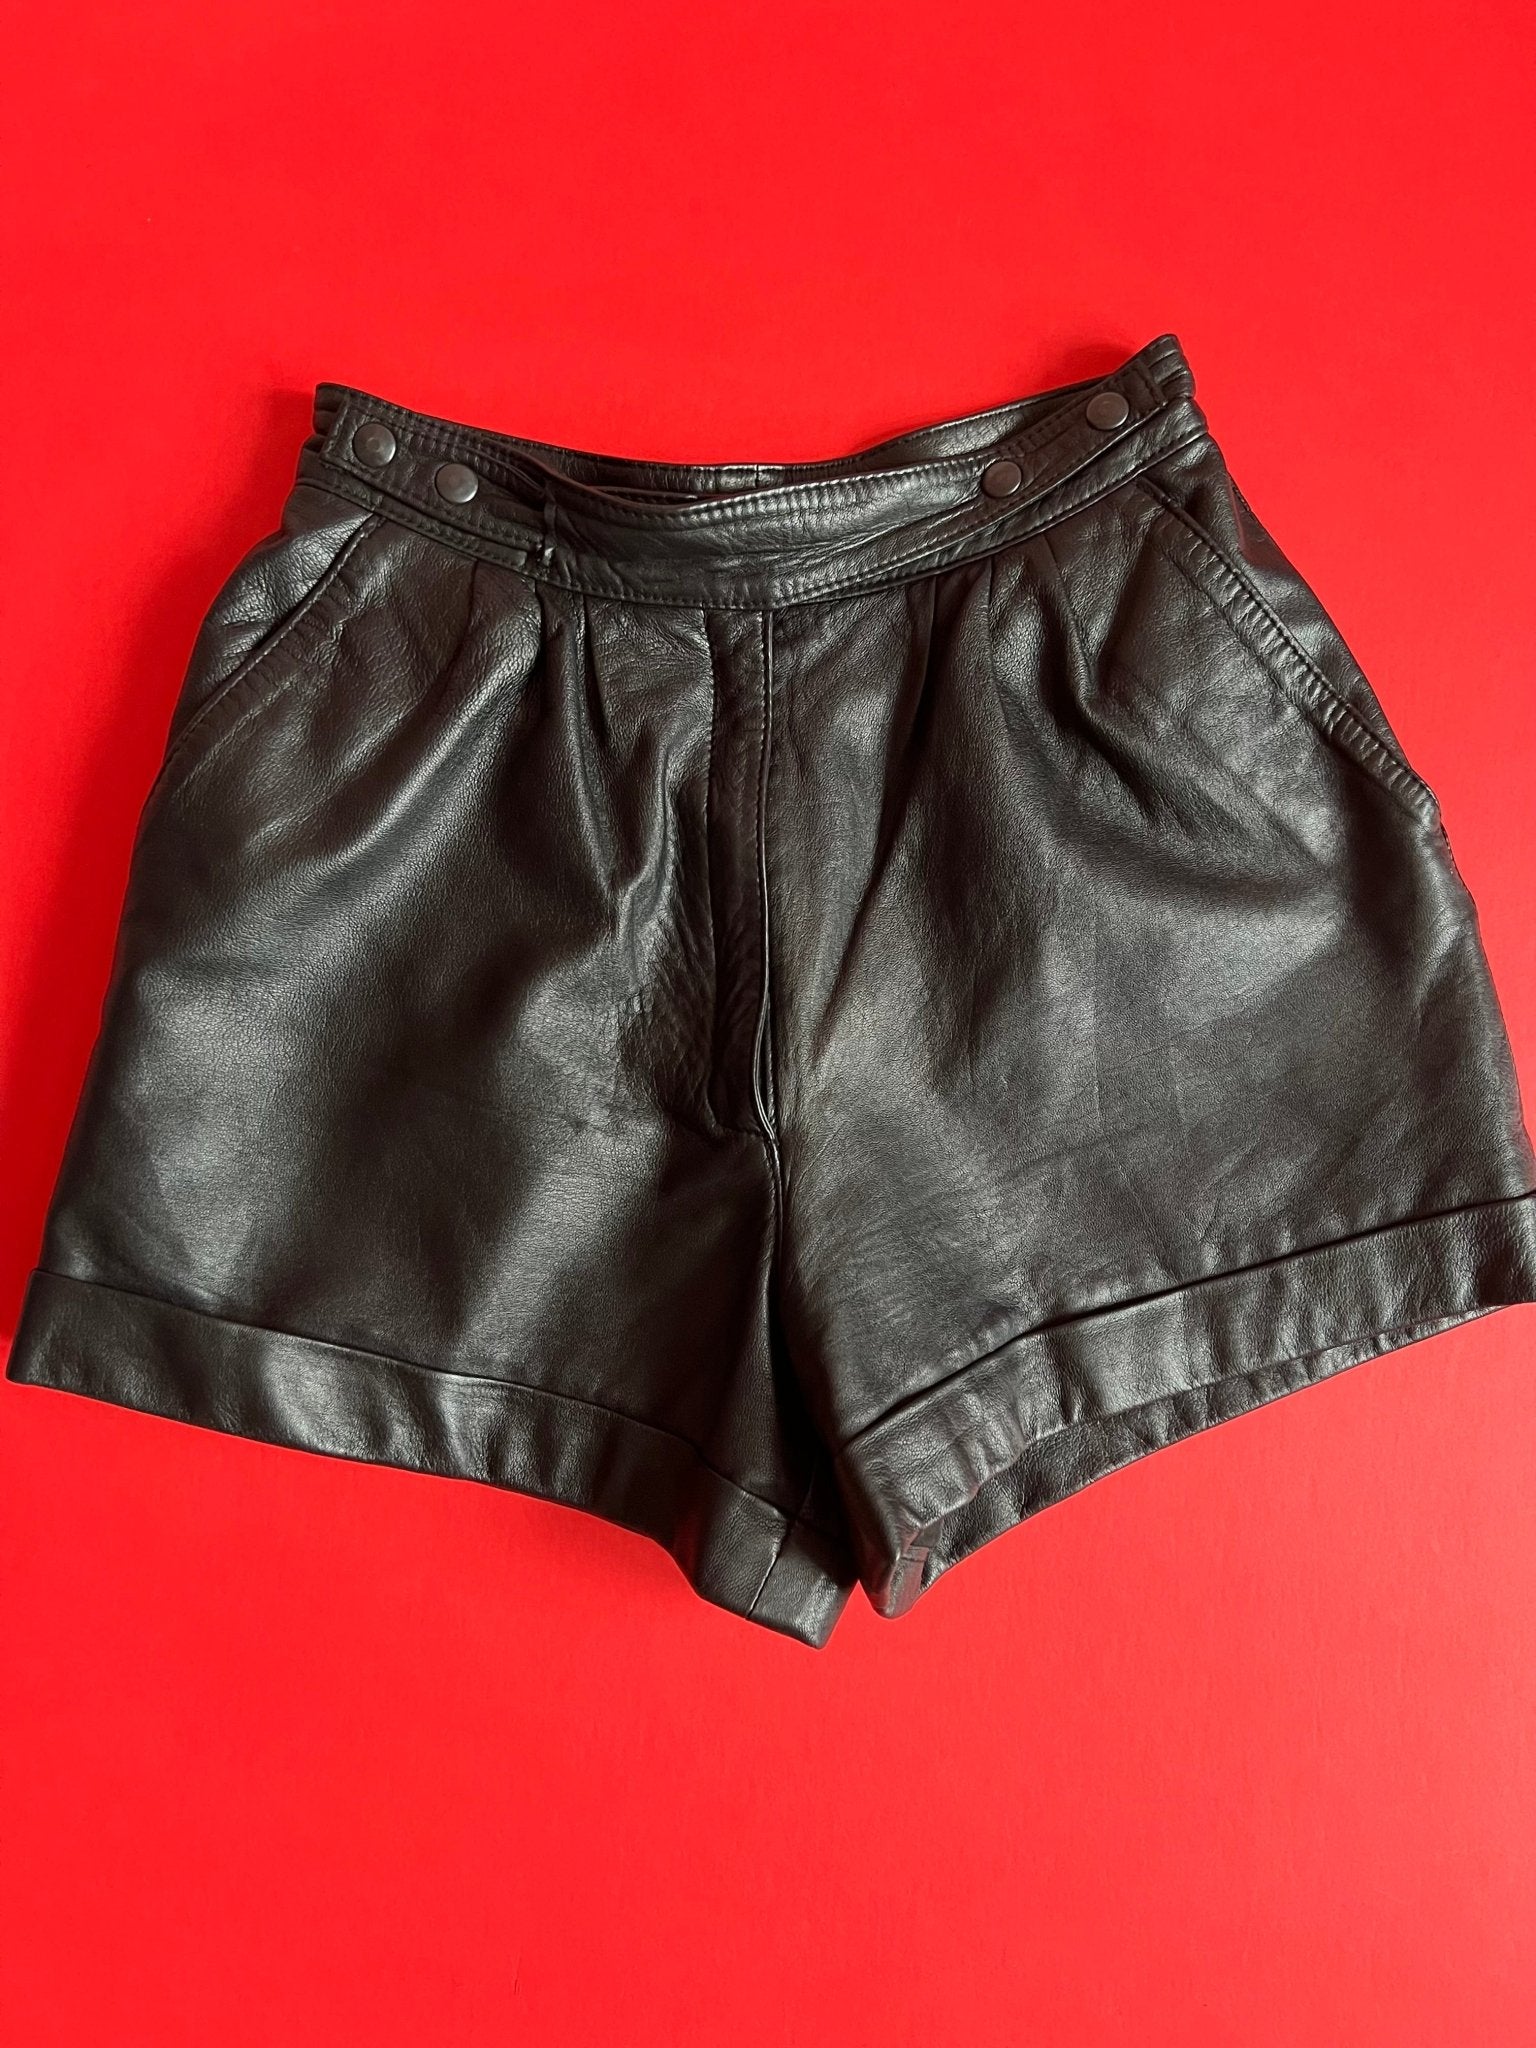 80s Leather Shorts - The Nightshift